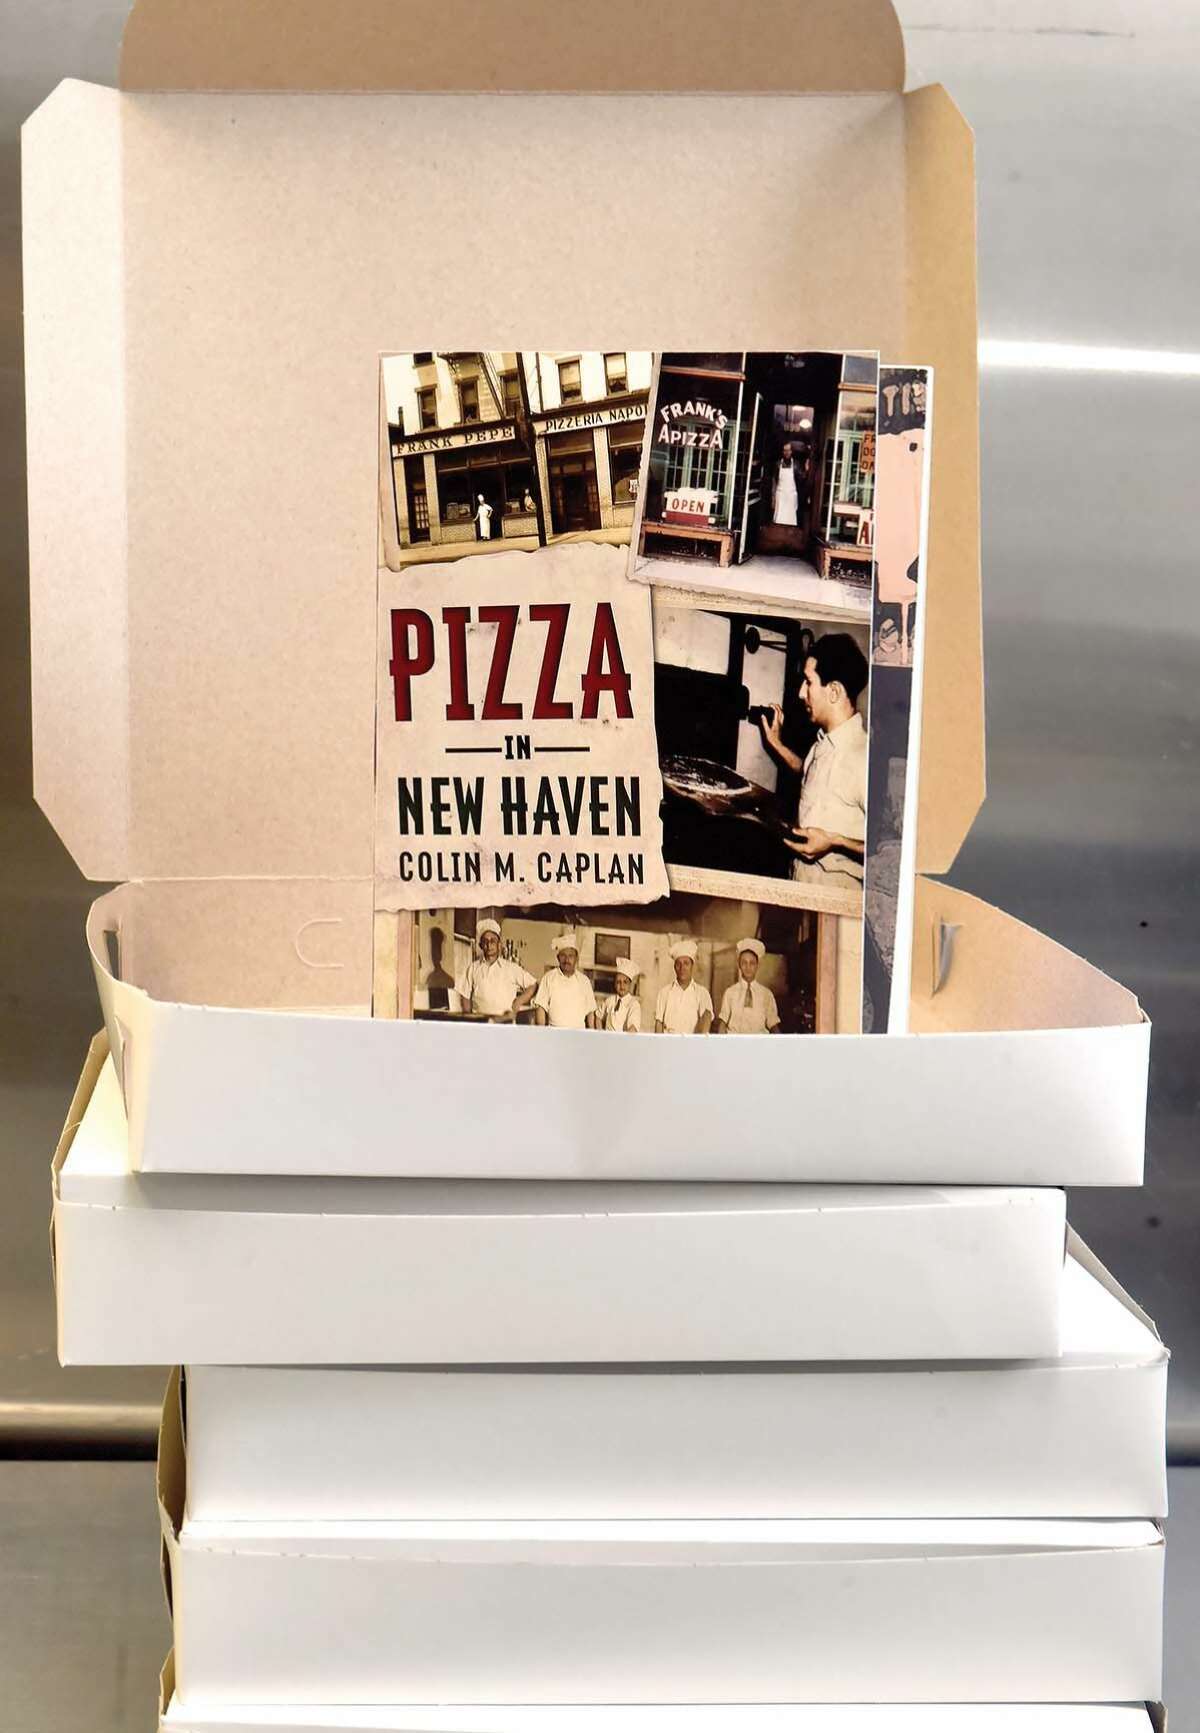 Colin M. Caplan is the author of Pizza in New Haven.